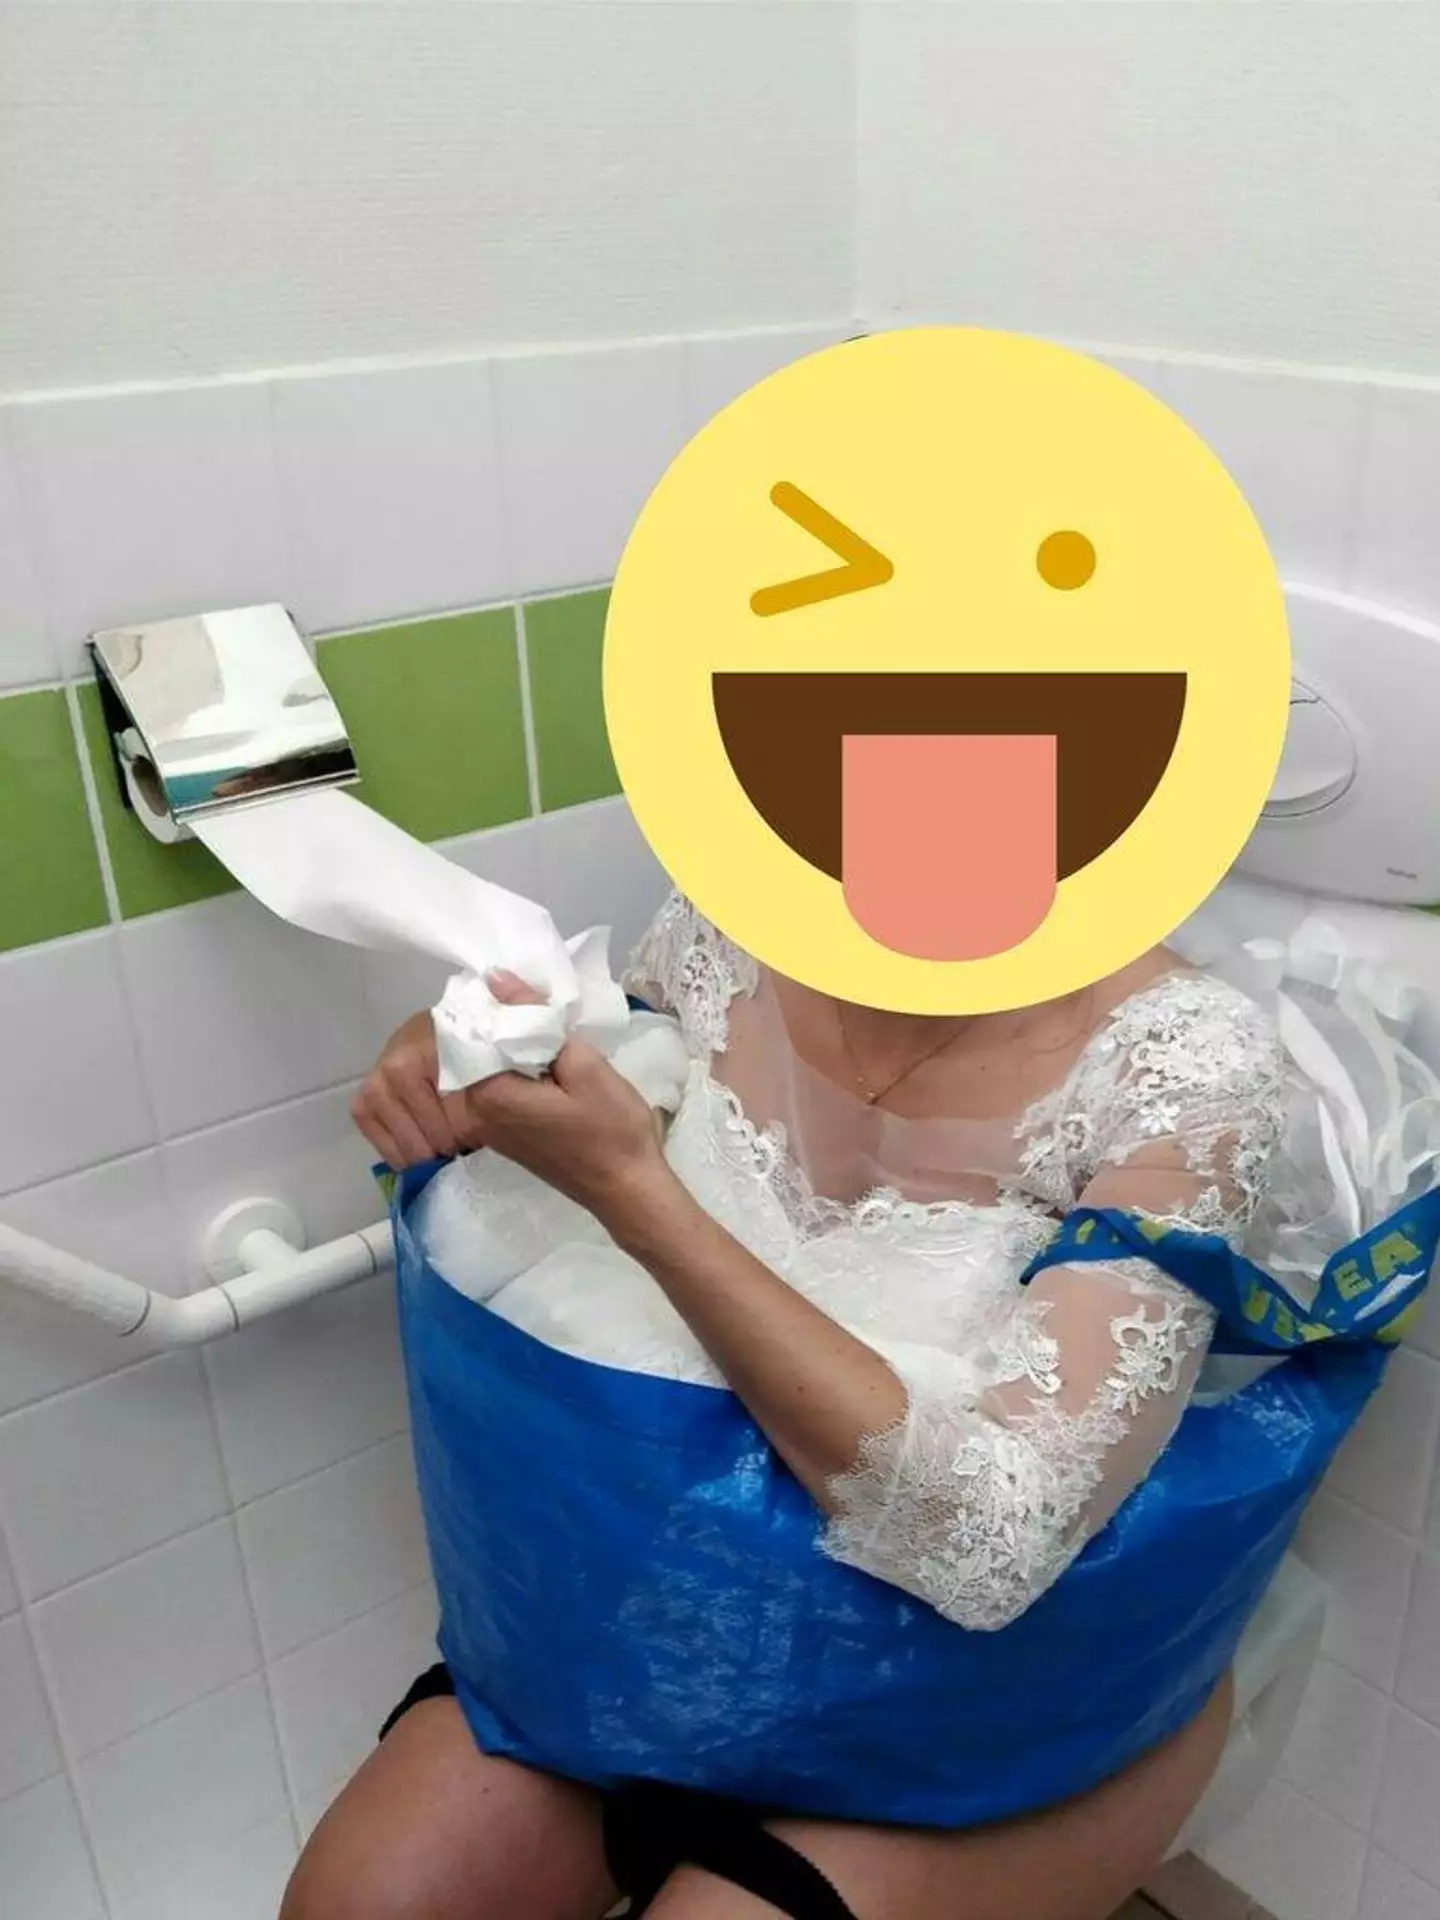 Tina cut a hole in the IKEA bag to make using the bathroom on her wedding day fuss-free.